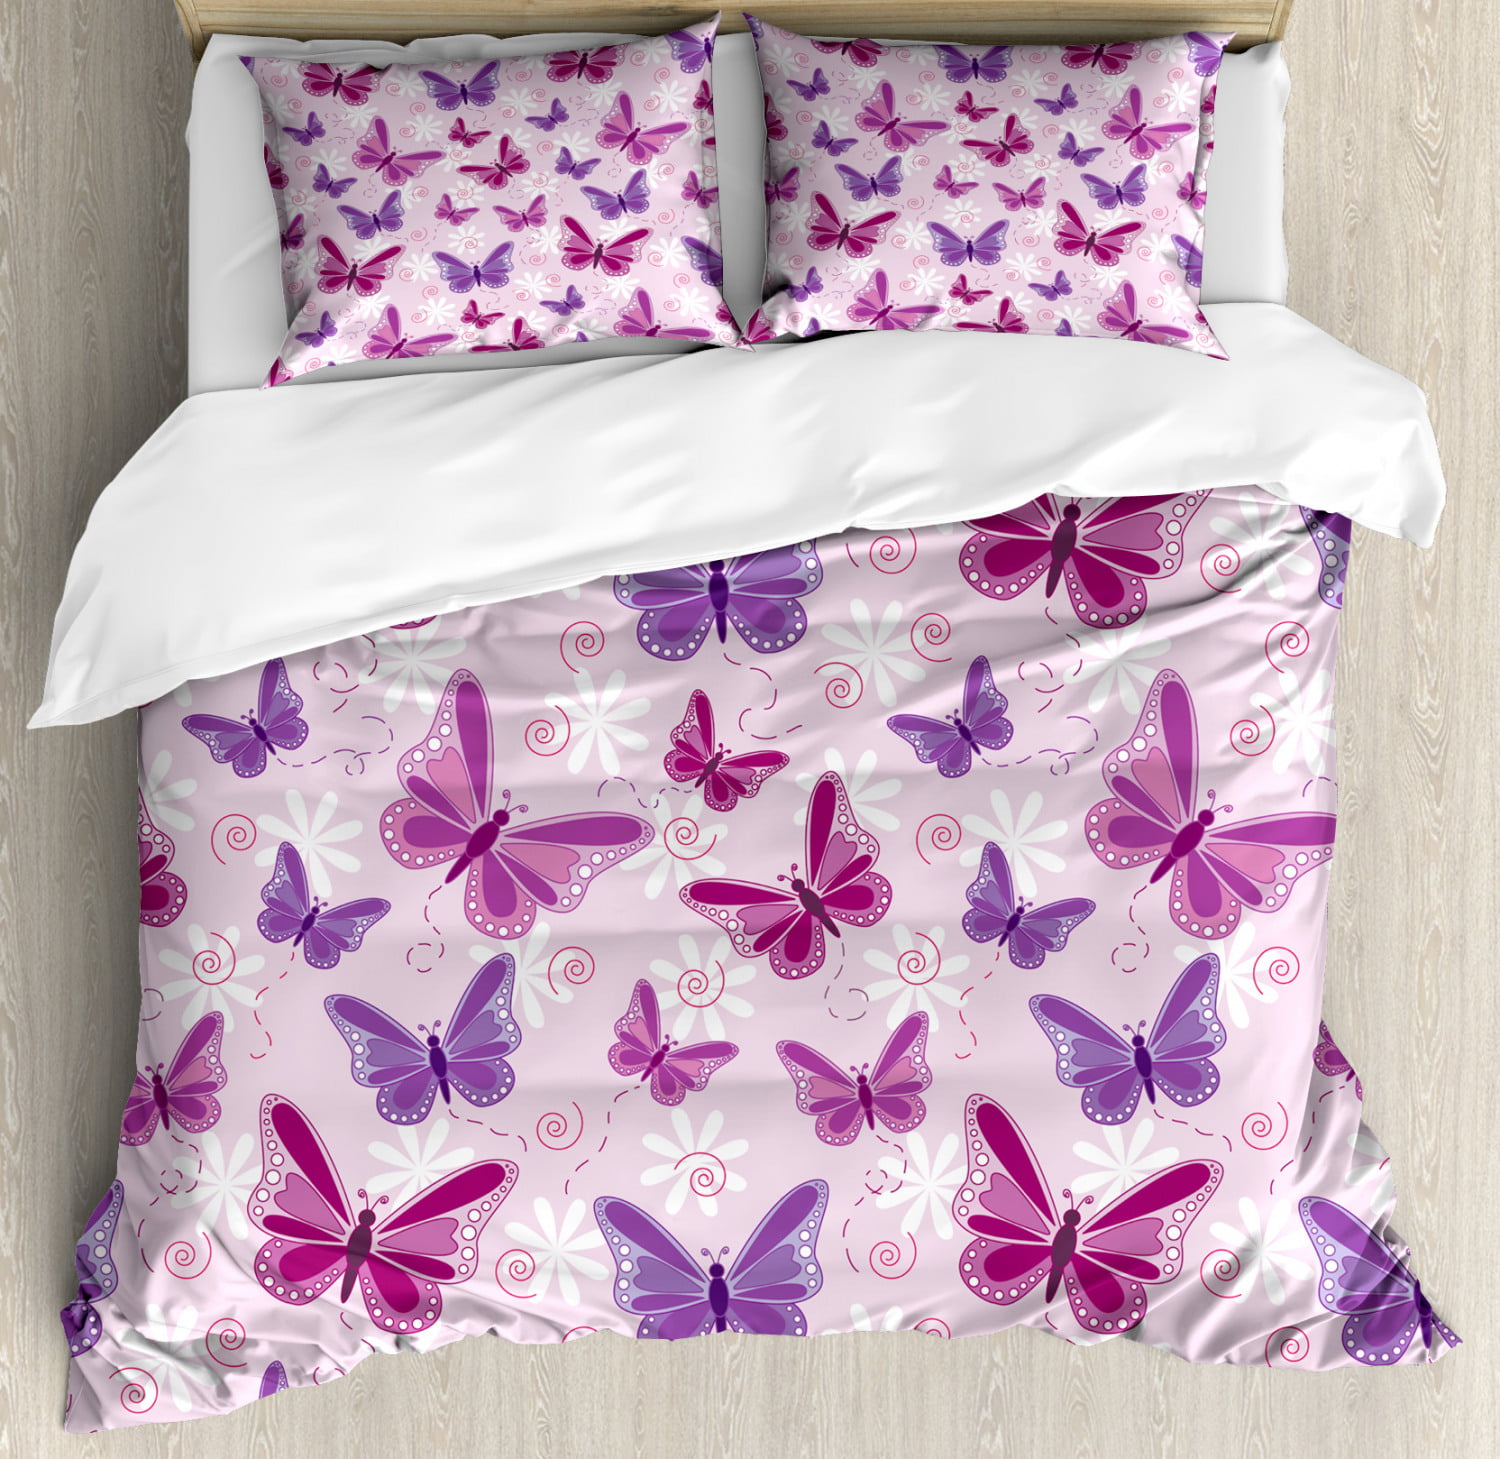 NEW FASHION  BUTTERFLY DUVET COVER+PILLOW CASES OR WITH SHEET OR CURTAINS 